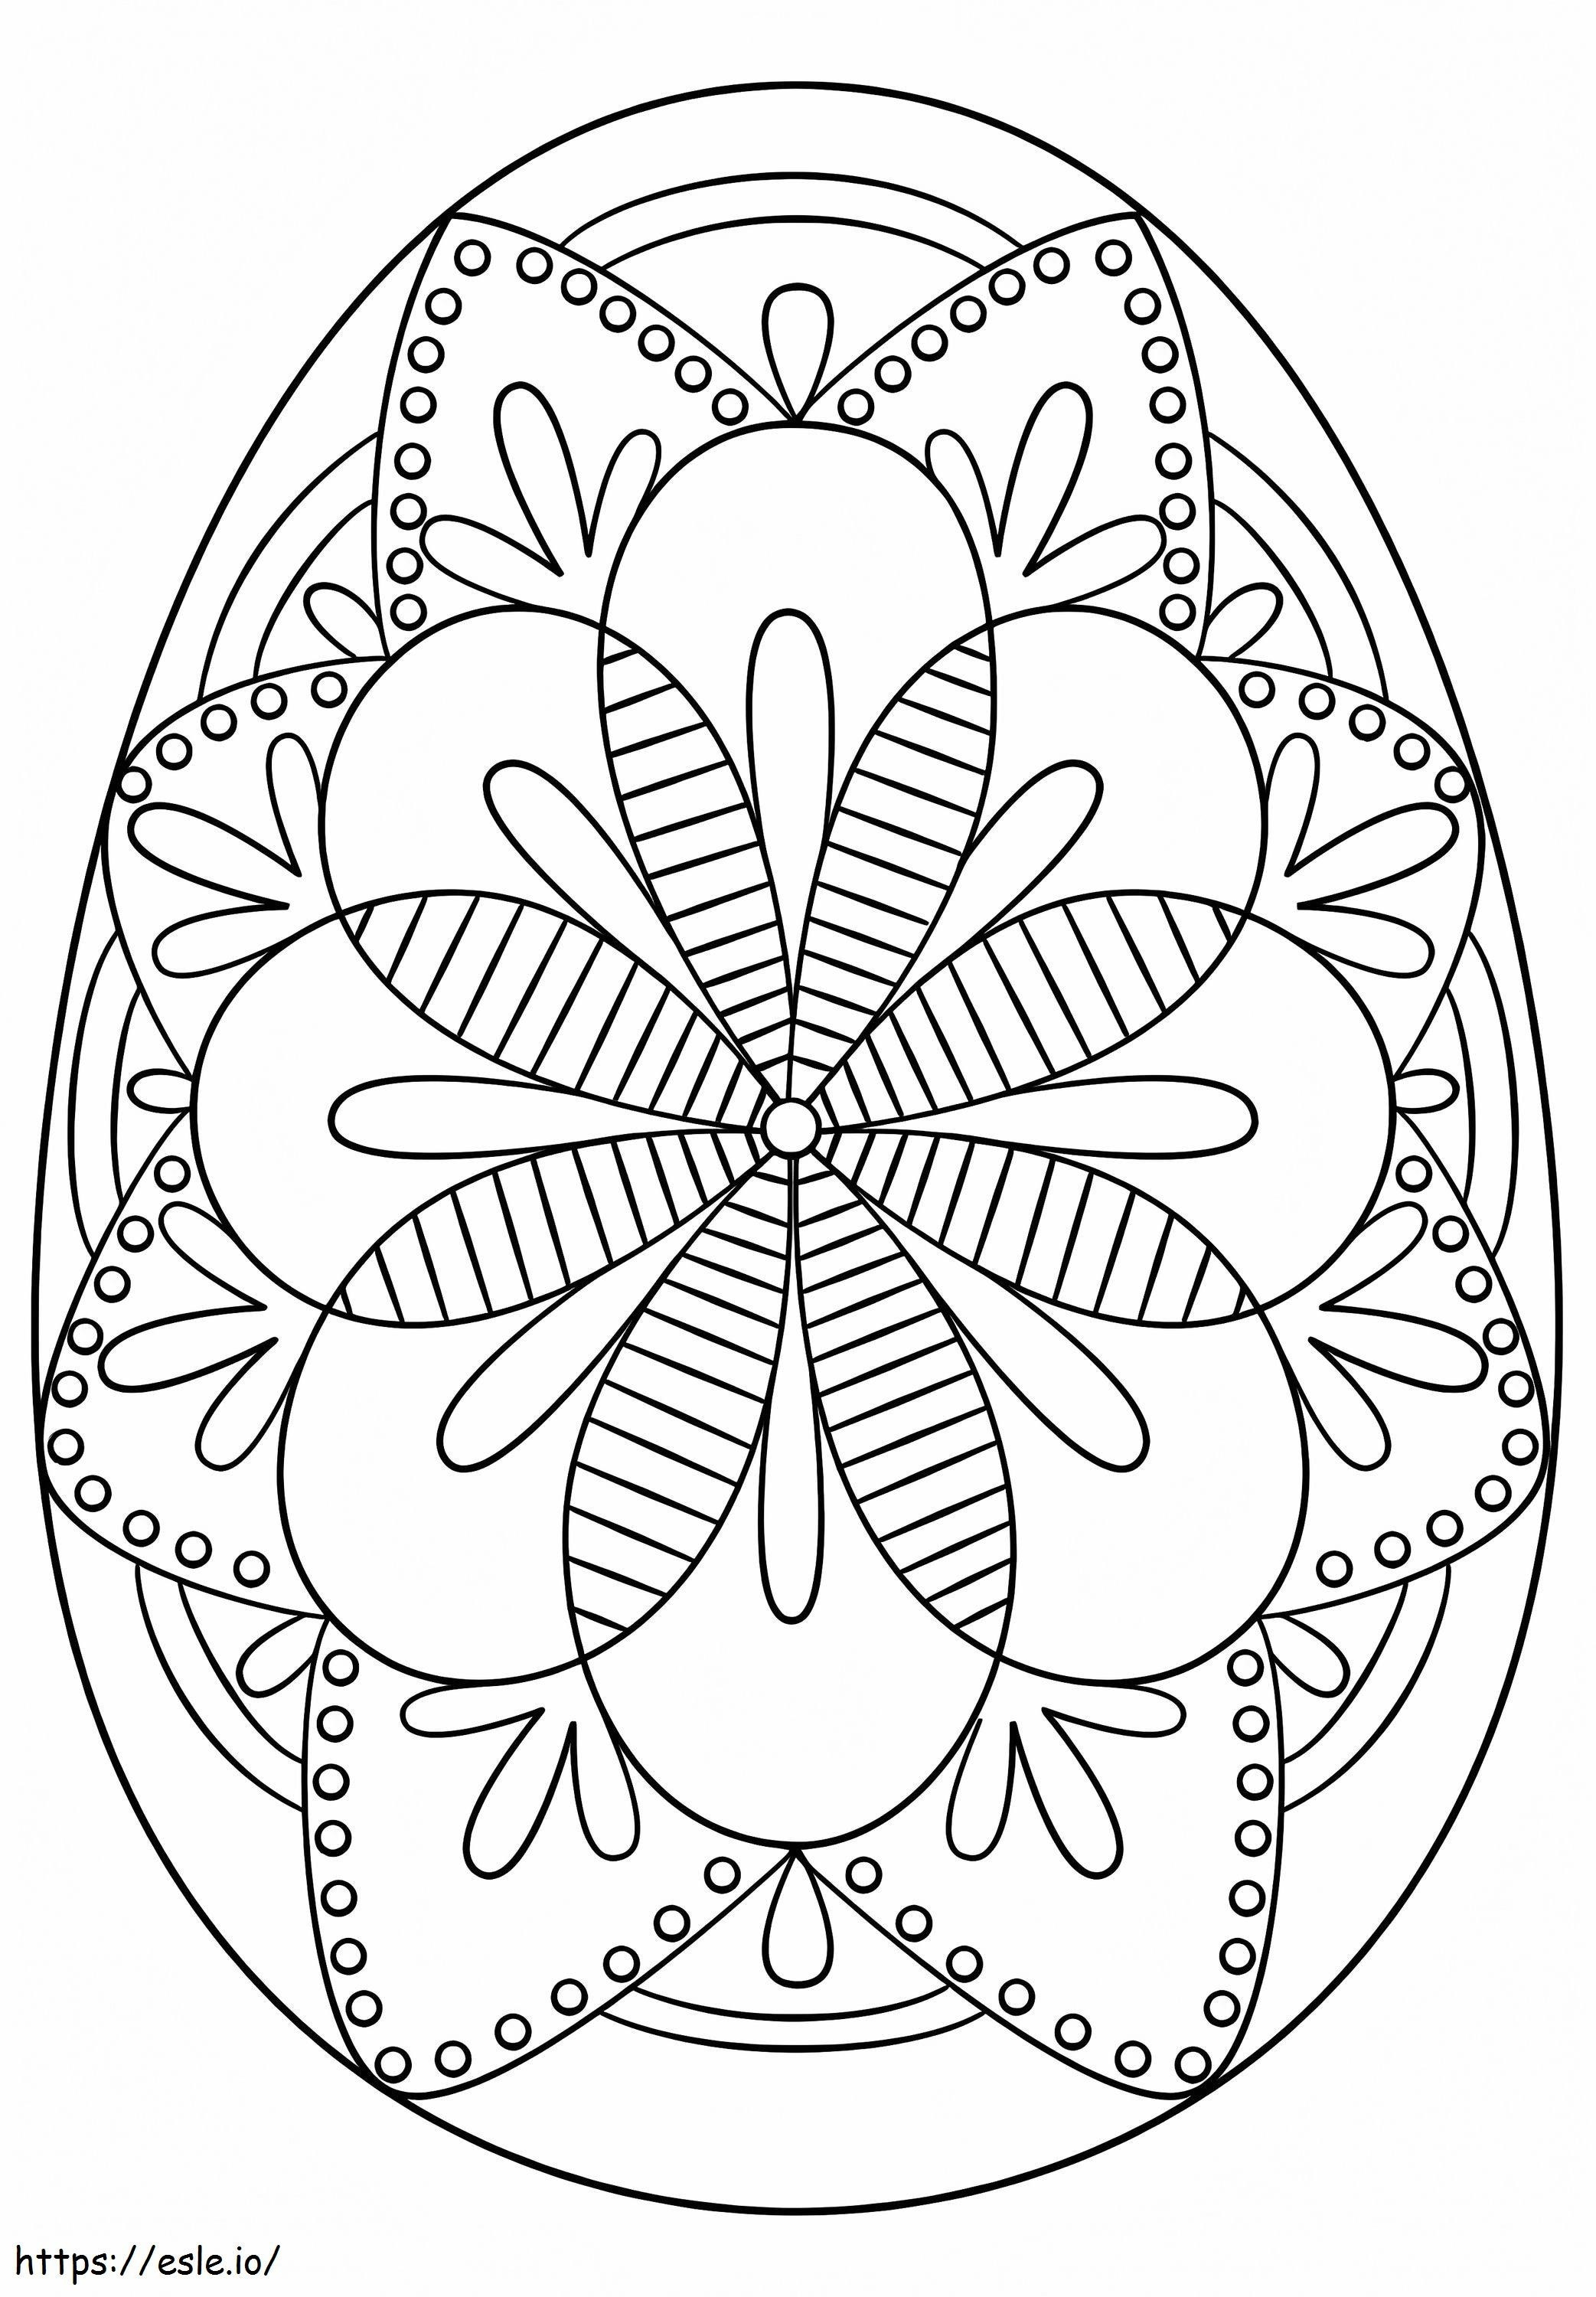 Wonderful Easter Egg 4 coloring page